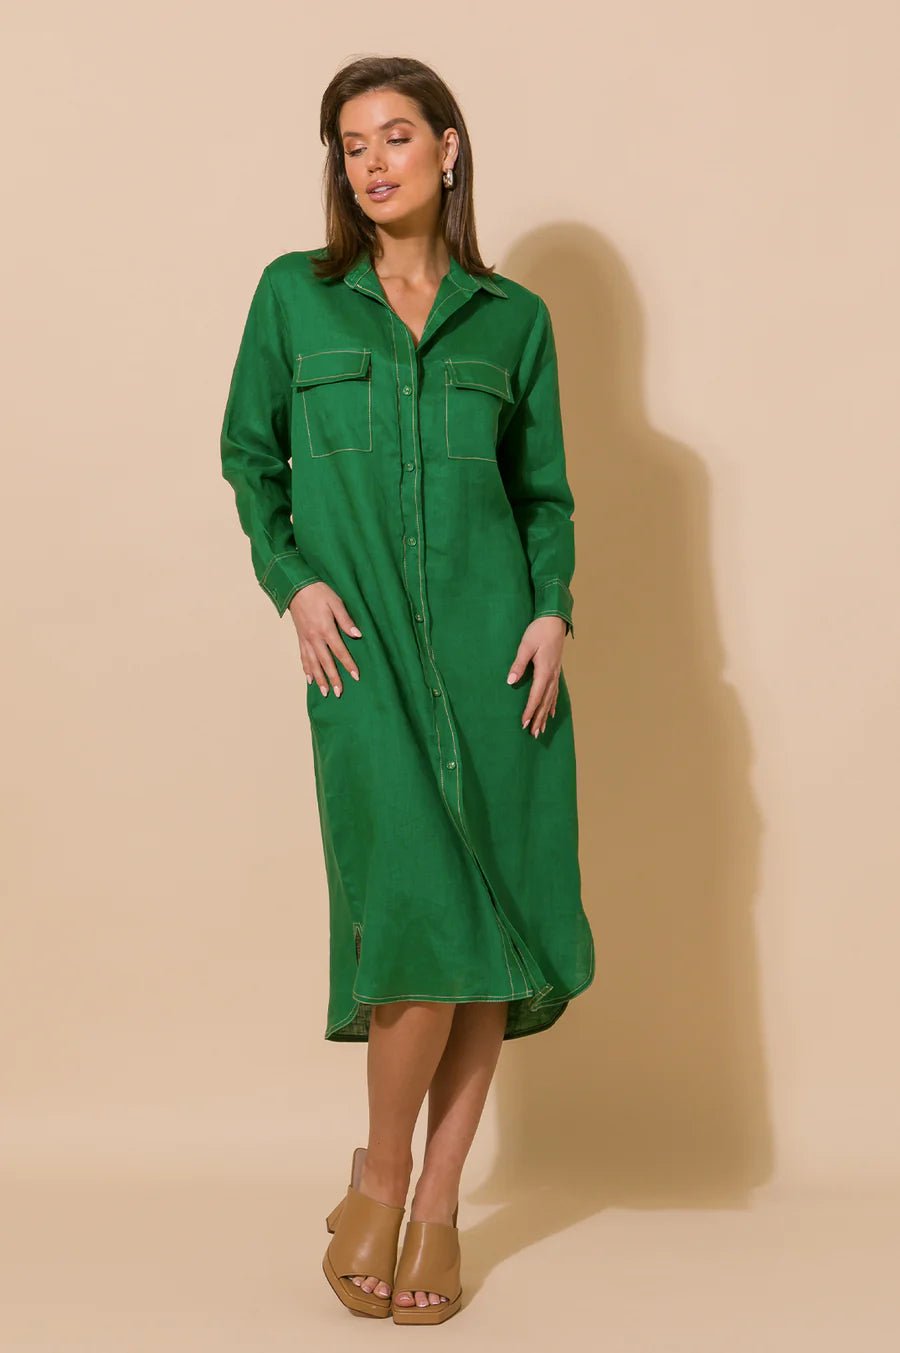 Petrina Contrast Stitch Linen Dress (Green) - Something For Me​​